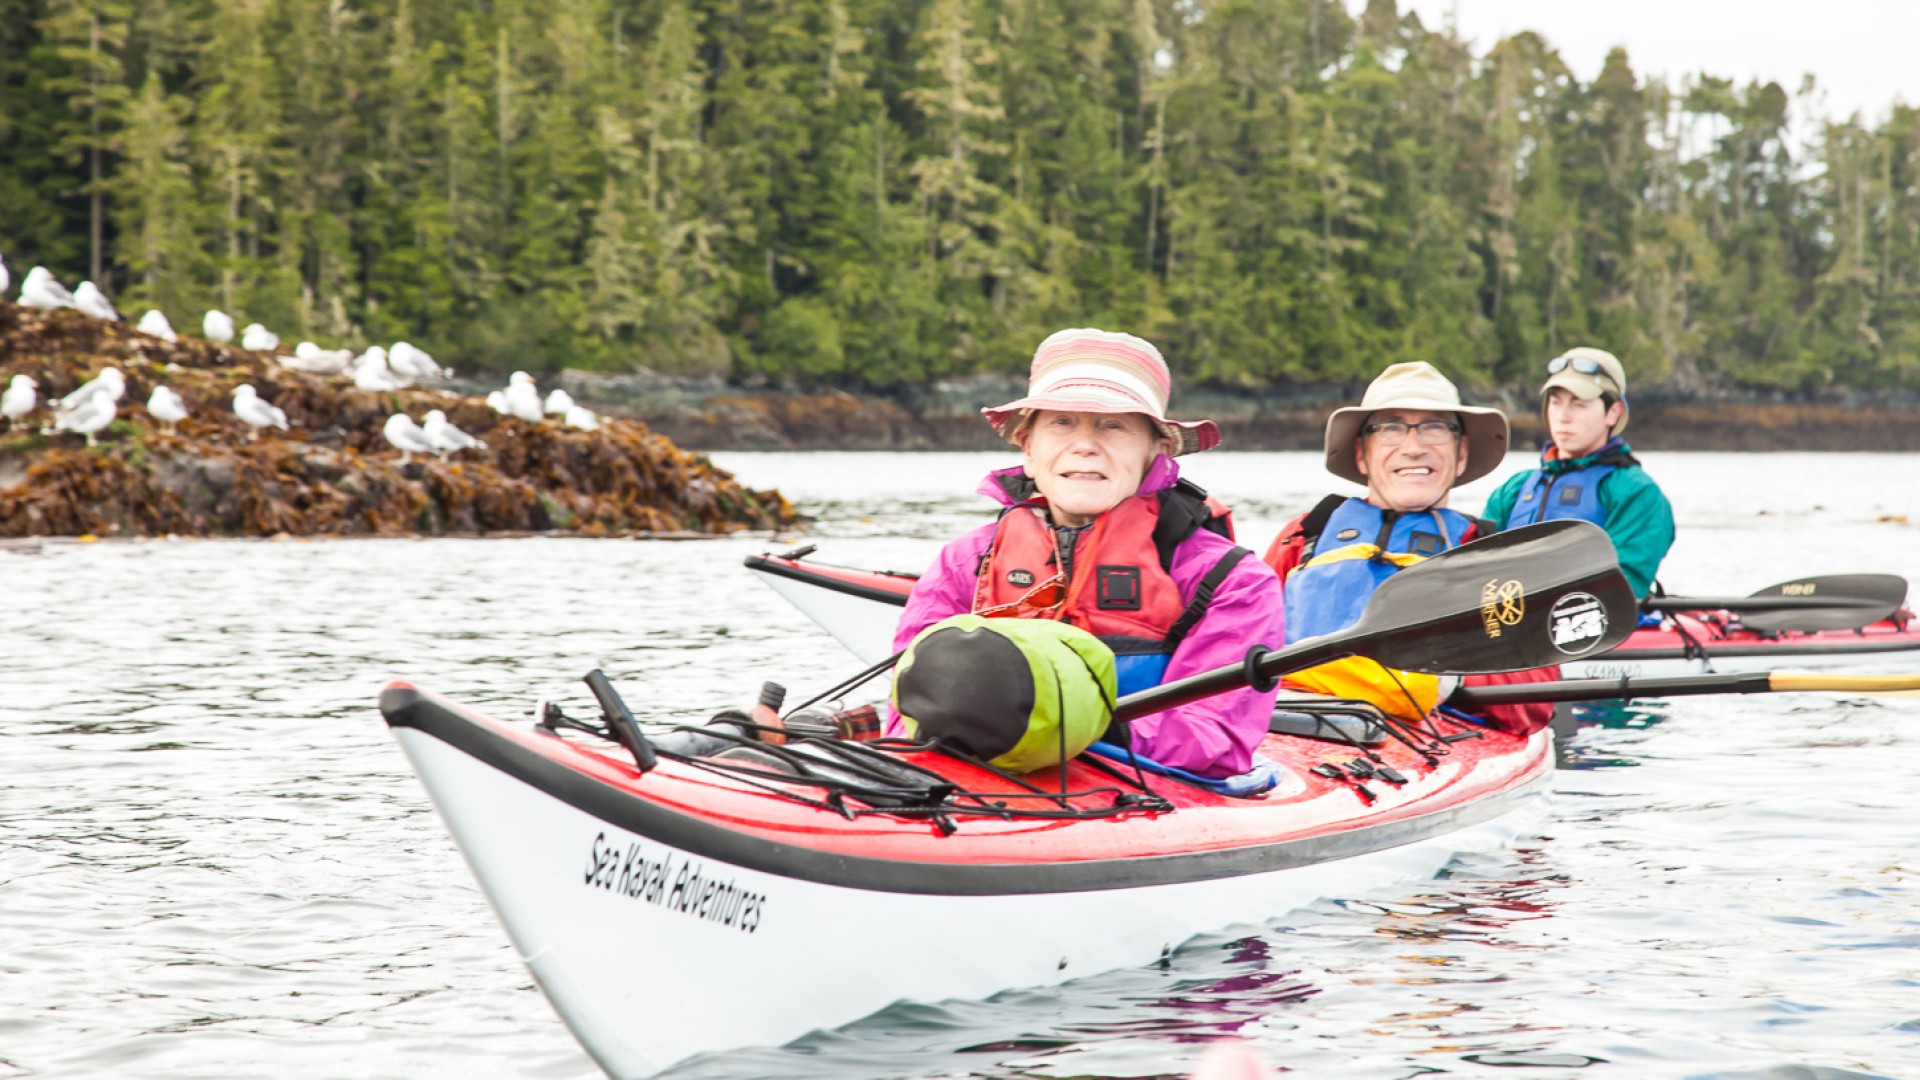 Two people in matching sun hats in a tandem kayak paddle through kelp and seaweed while smiling for the camera